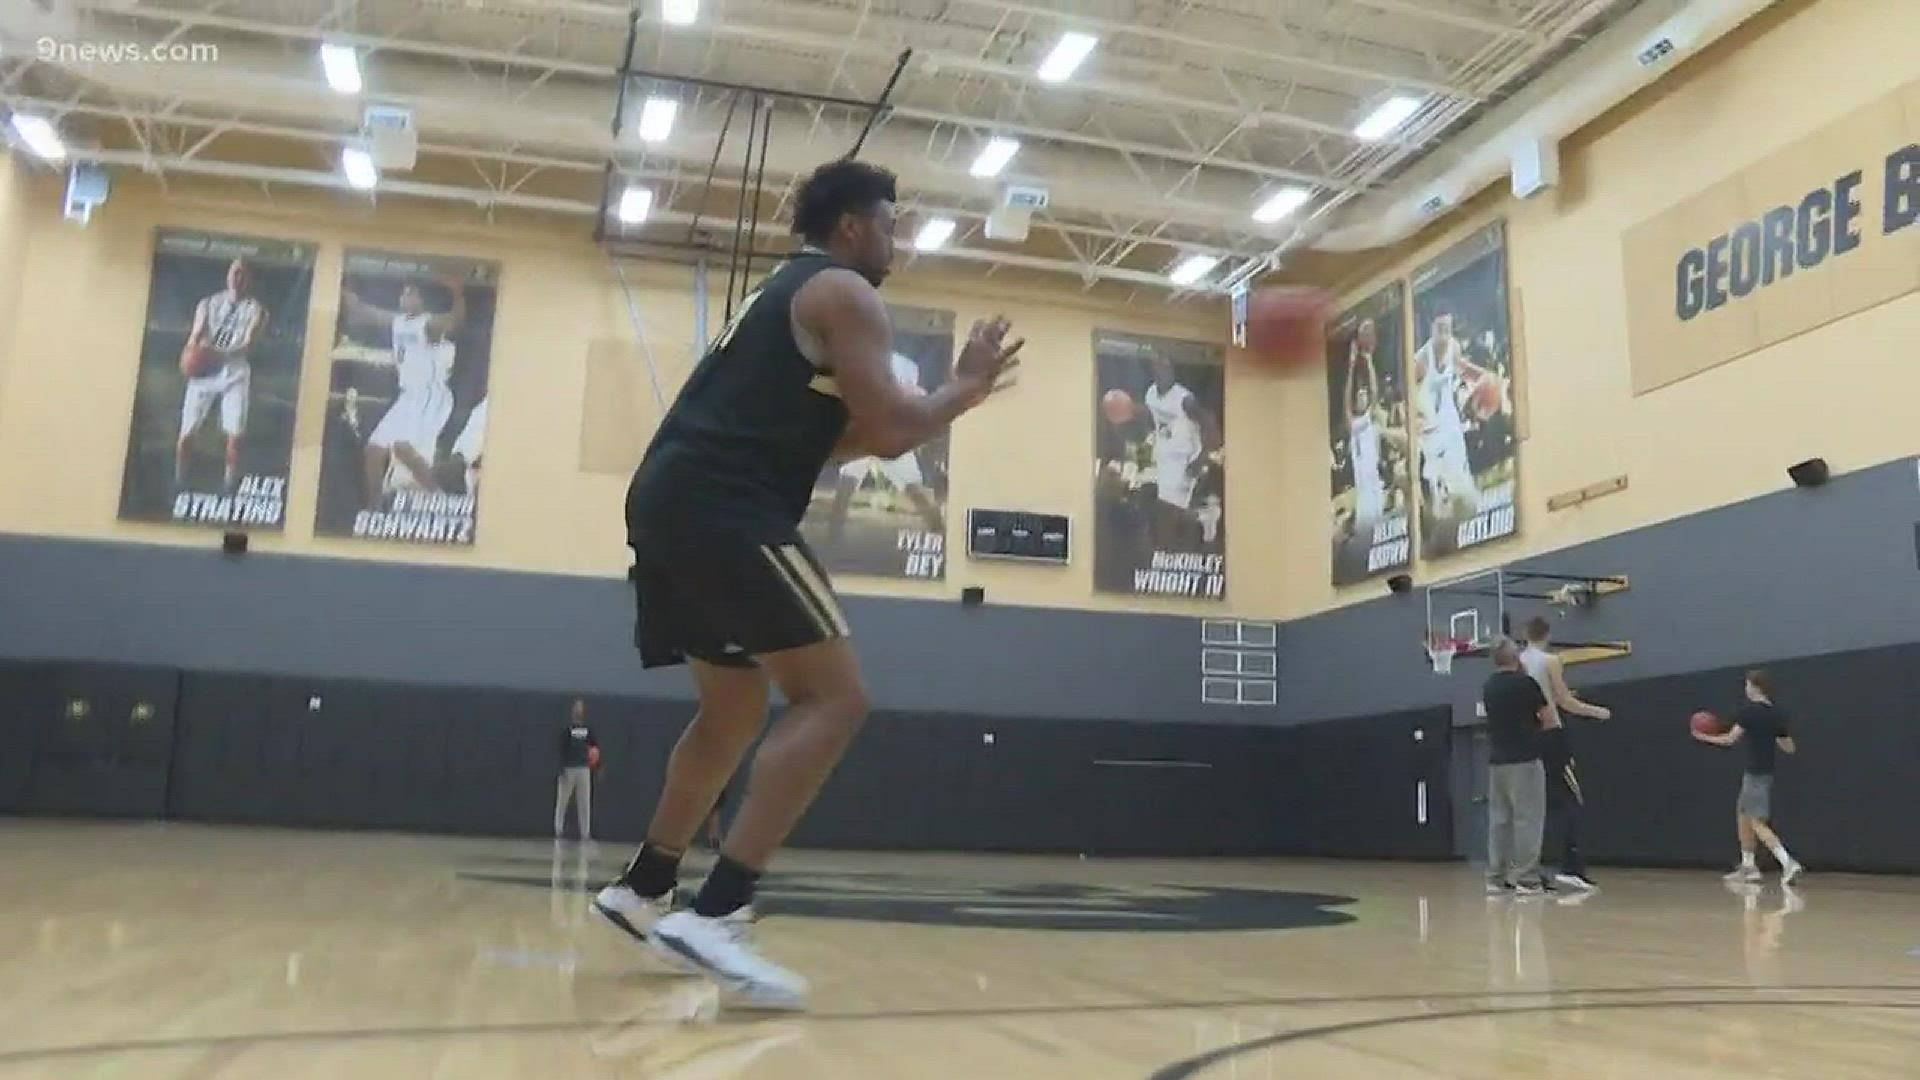 At 19 years old, the Buffaloes freshman forward went numb from head to toe while playing in a pick-up basketball game.